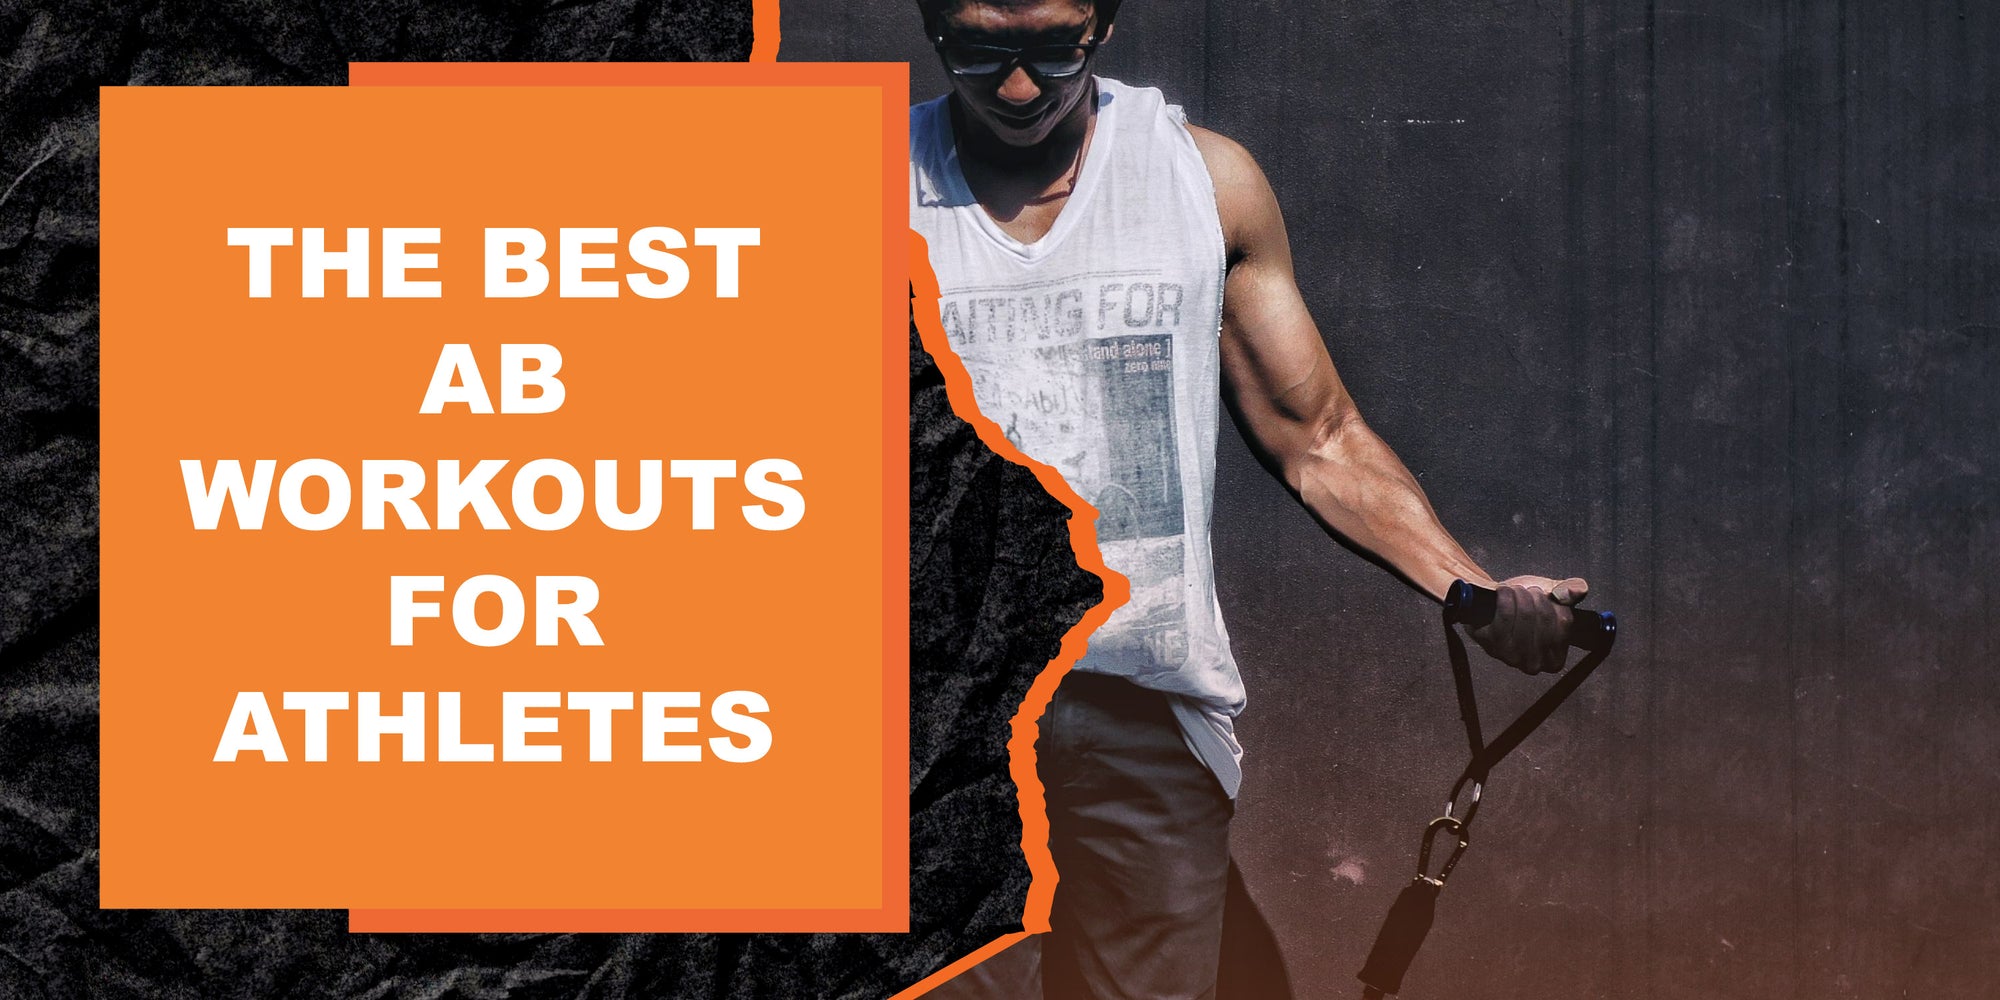 The Best Ab Workouts for Athletes